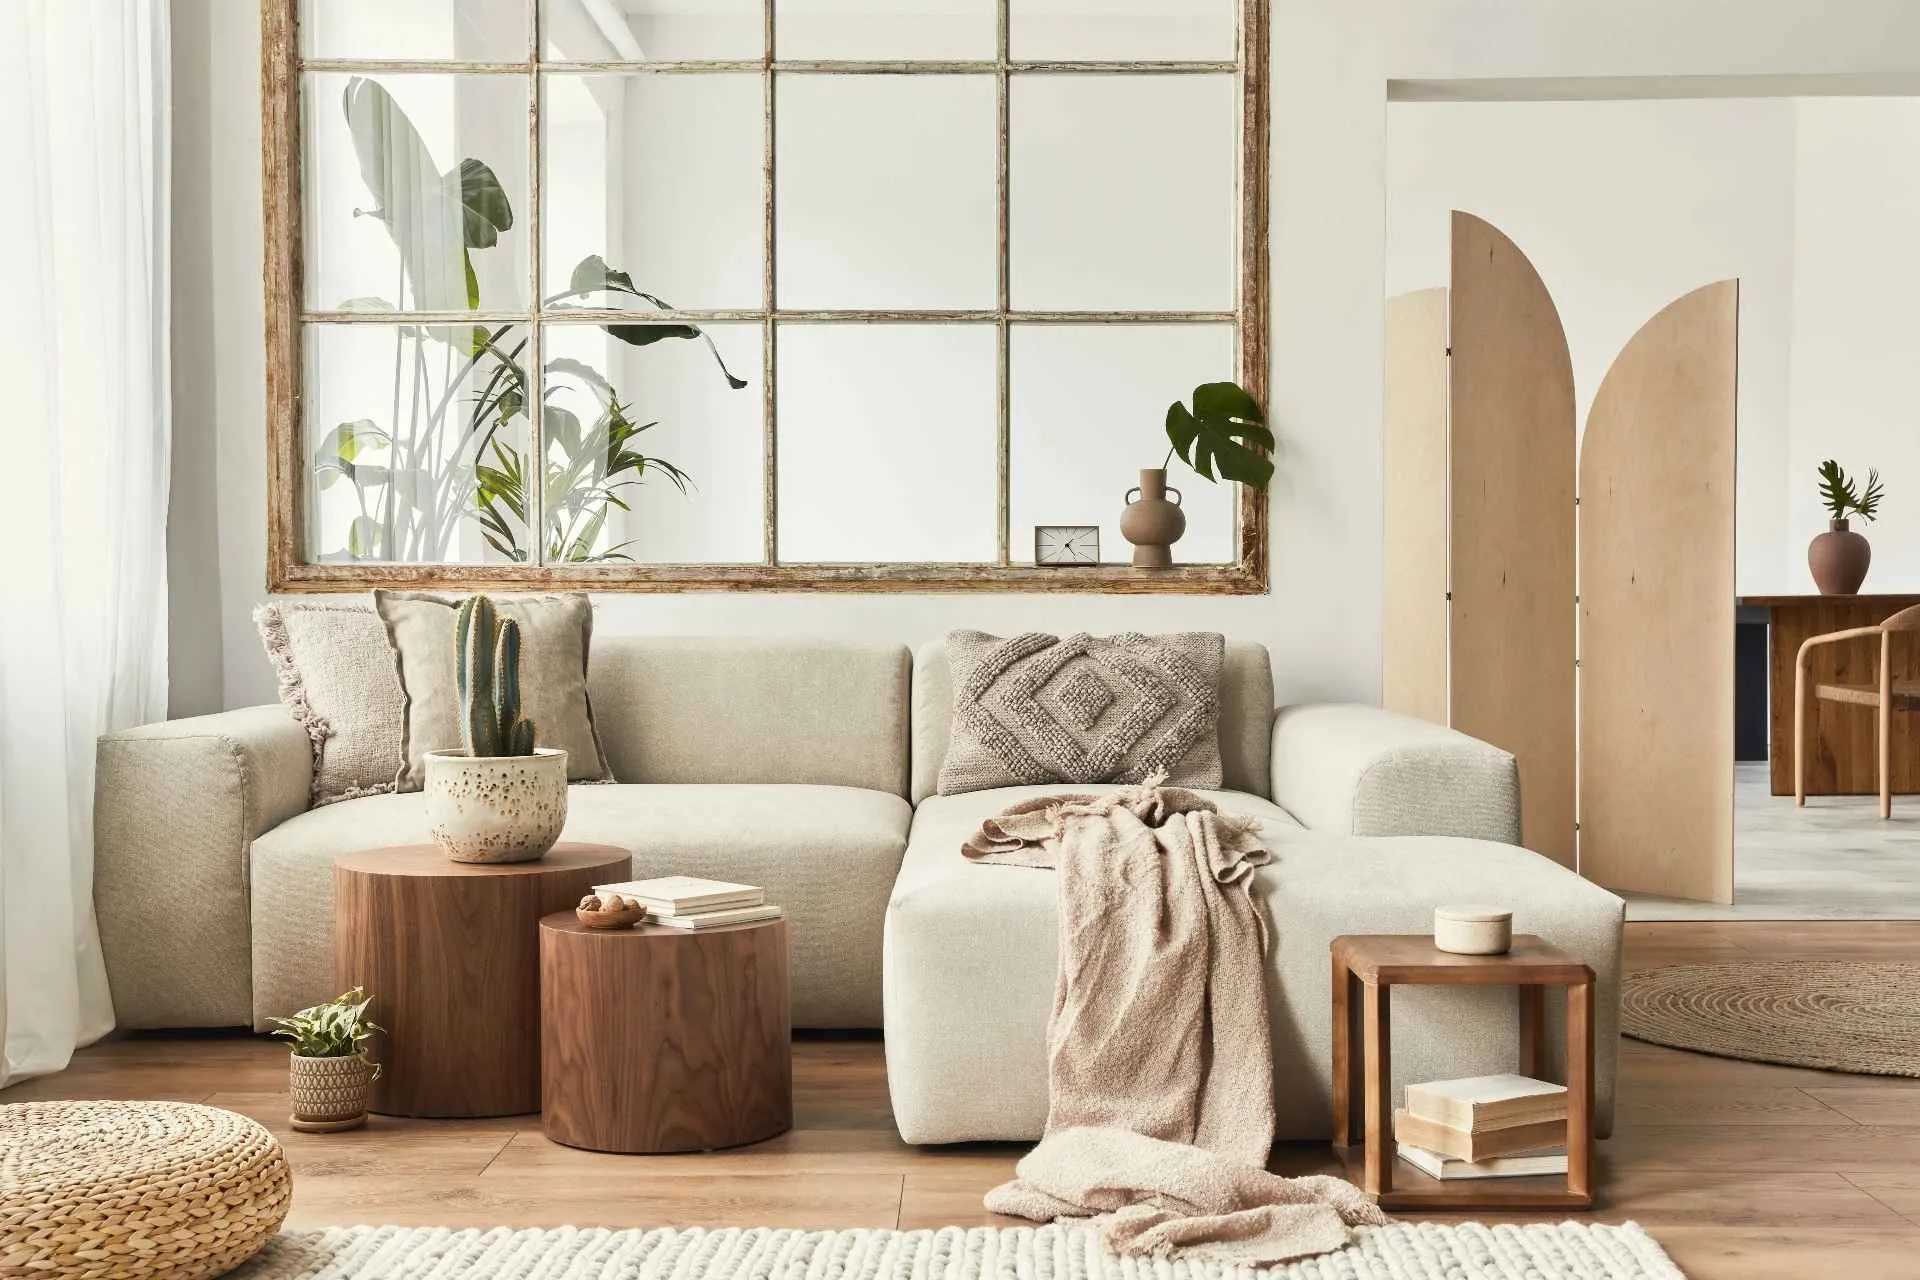 white living room combination design with brown wooden floors, white sofa, table, and plants